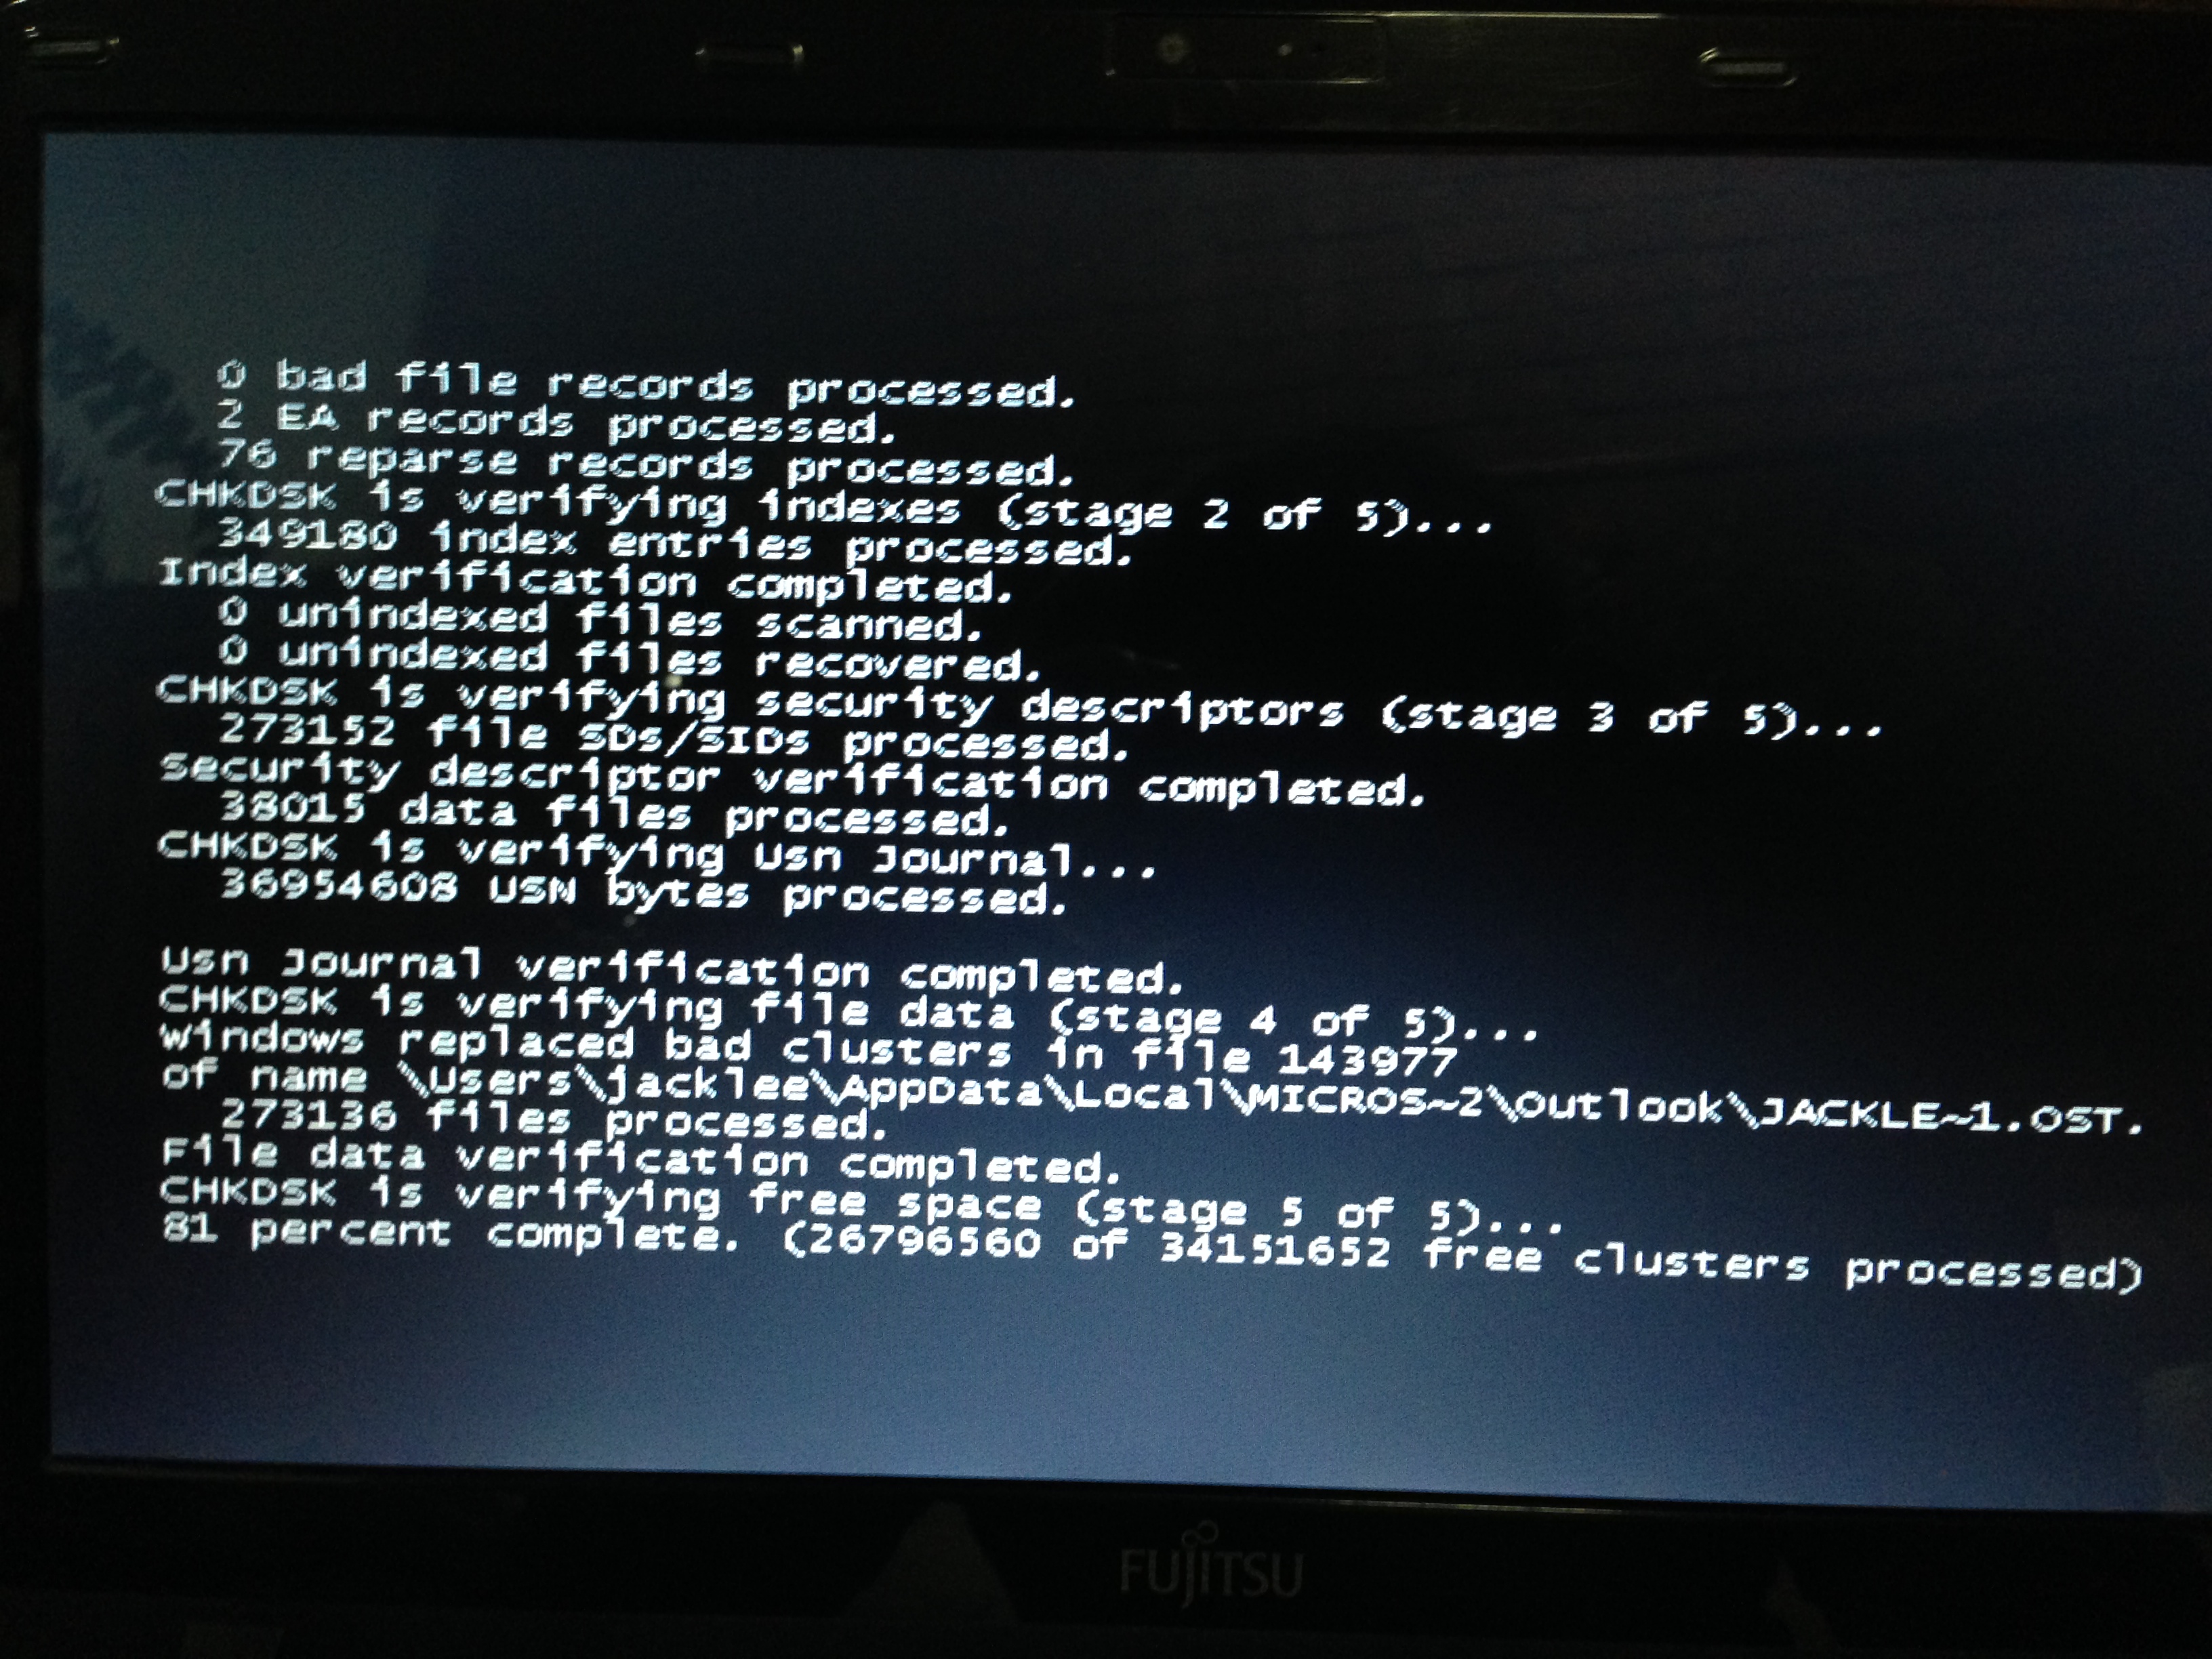 CHKDSK running on a computer